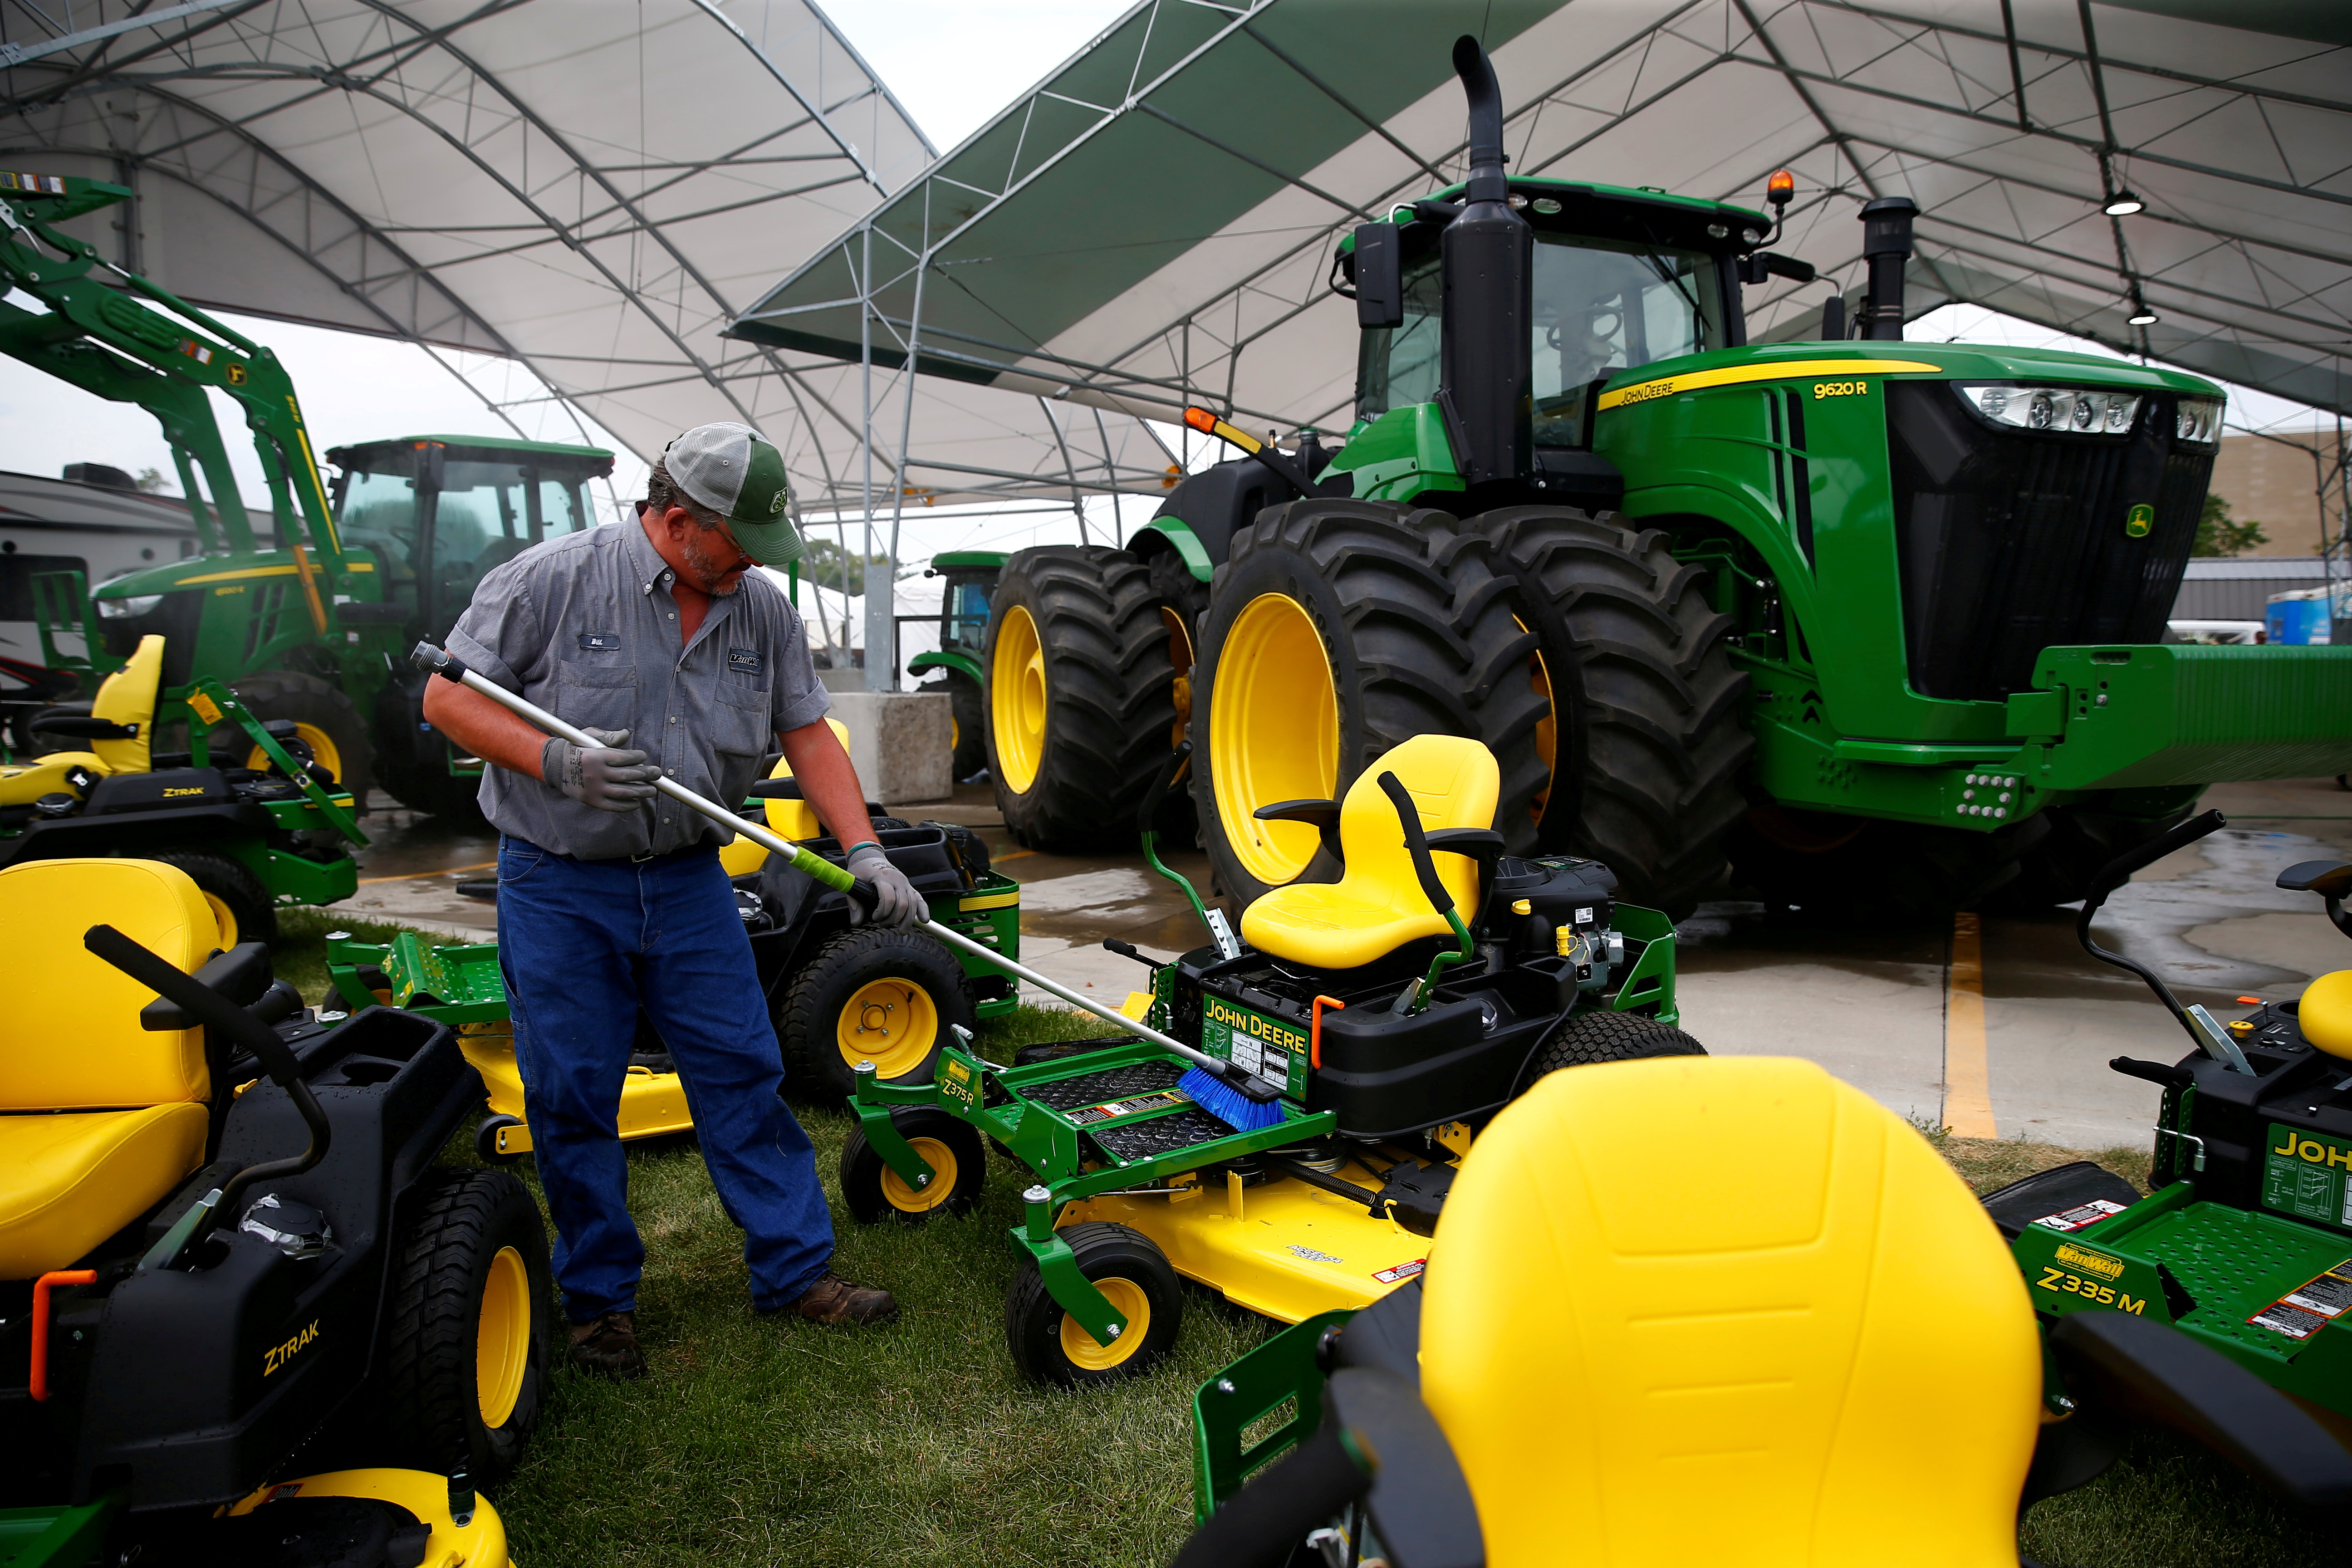 A man cleans farm machinery as people prepare for the Iowa State Fair in Des Moines, Iowa, U.S. August 5, 2019. REUTERS/Eric Thayer/File Photo